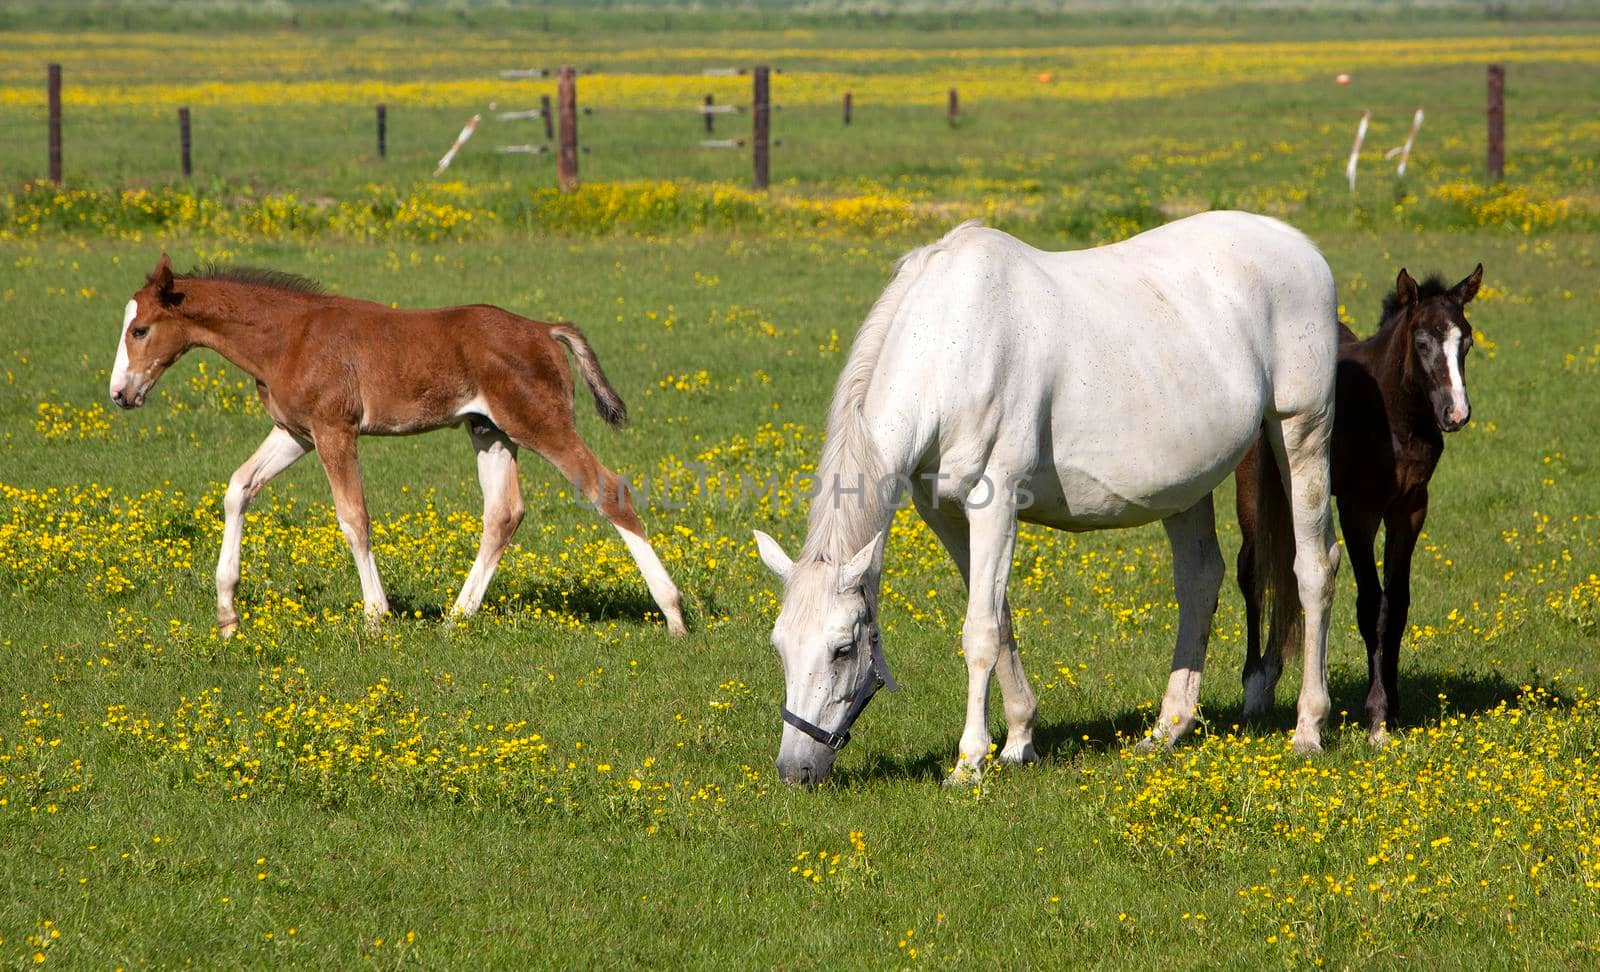 white horse and brown foal graze in summer meadow with yellow buttercup flowers